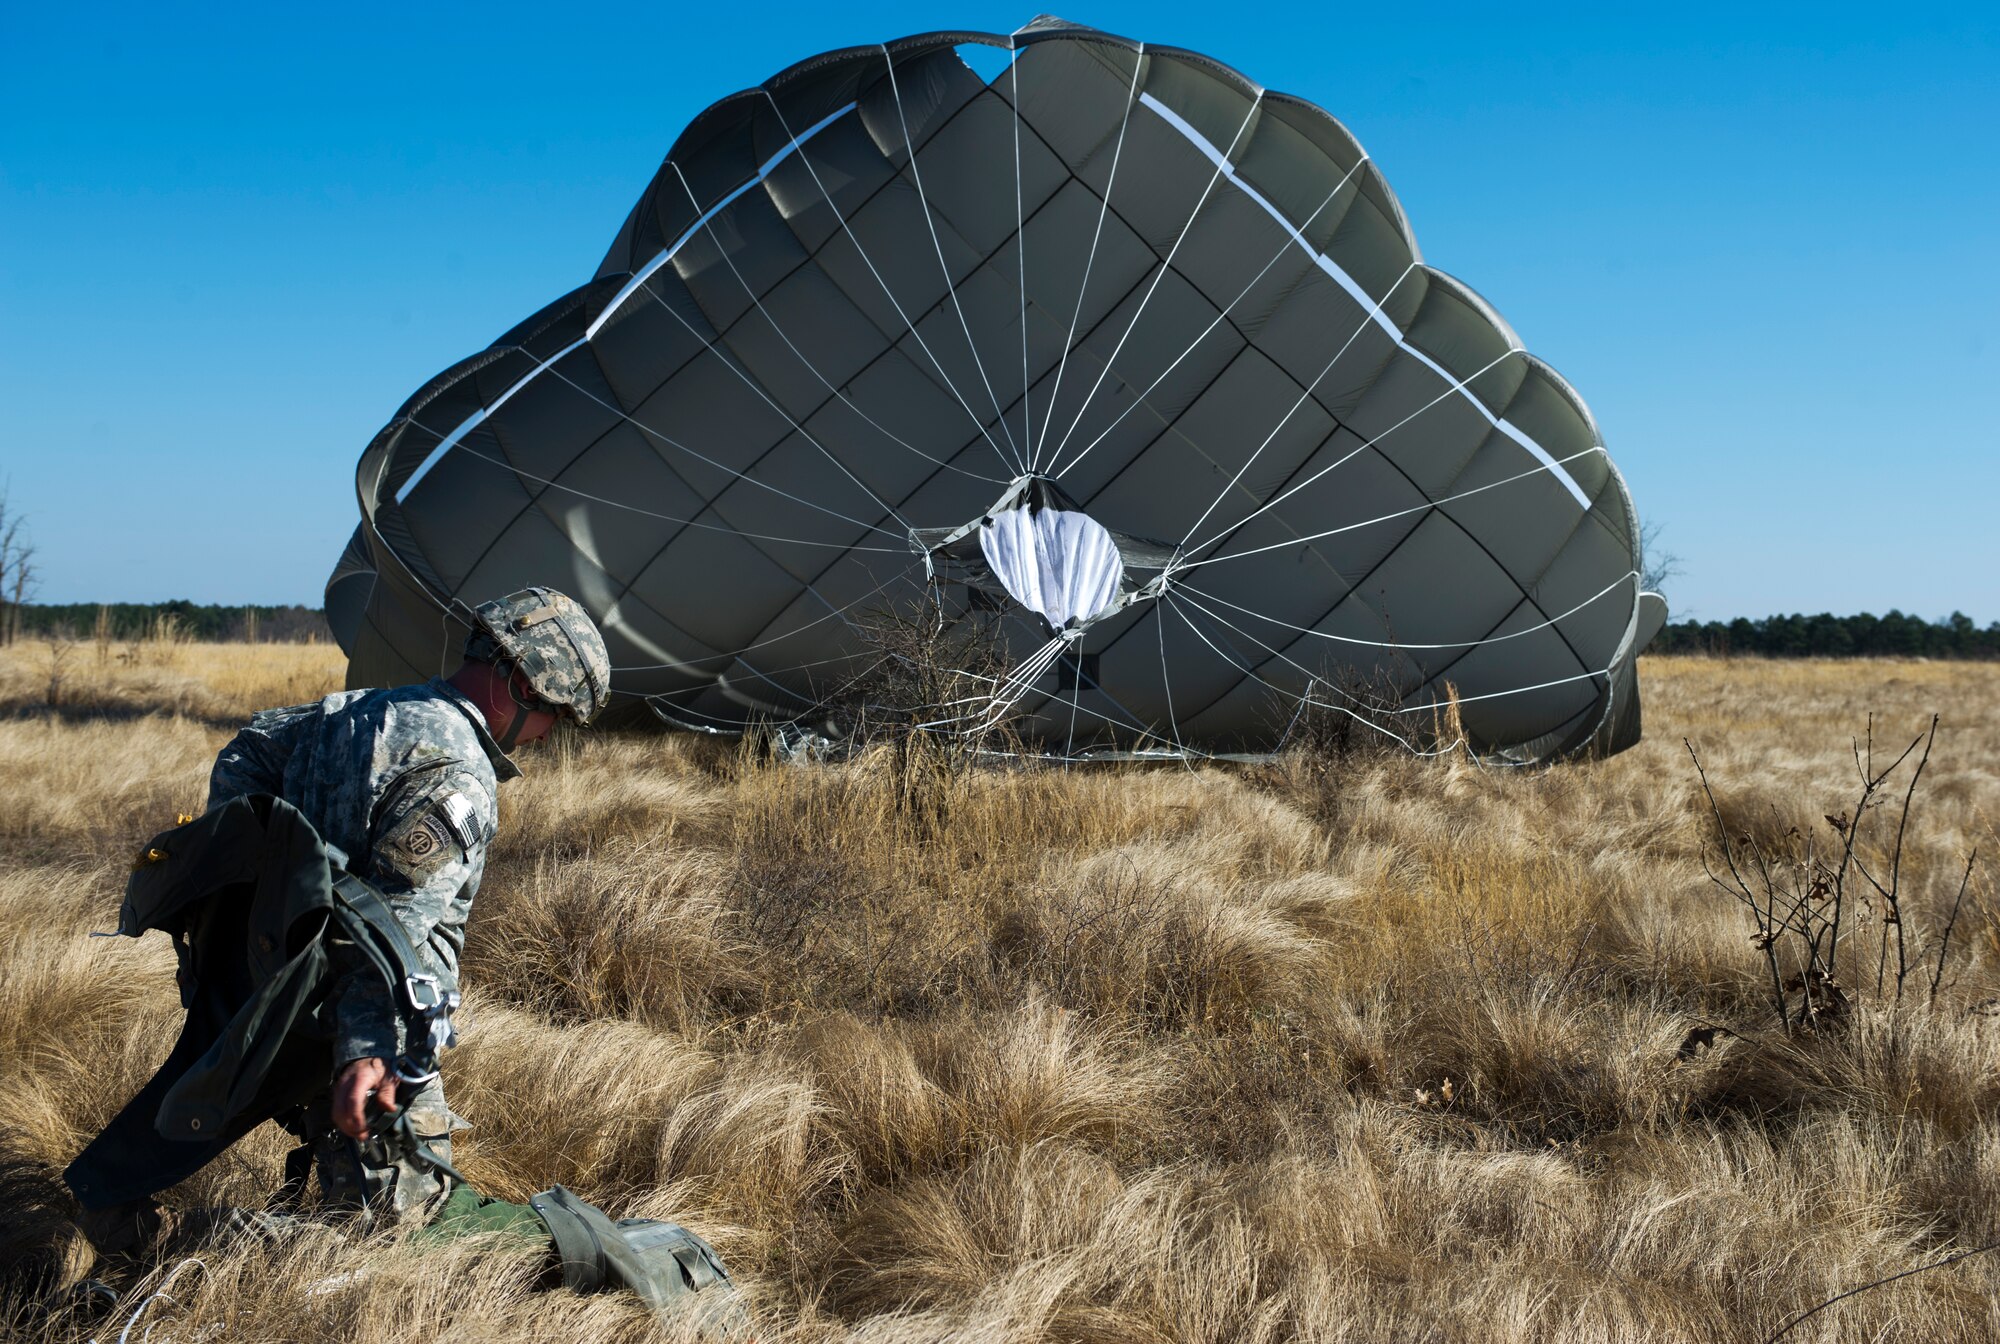 U.S. Army Staff Sgt. Andrew Williamson, a squad leader with Charlie Company, 1st Brigade, 82nd Airborne Division, lands after a static line airdrop during Joint Operational Access Exercise (JOAX) 13-02 at Camp Mackall, N.C., Feb. 24, 2013. A JOAX is designed to enhance service cohesiveness between Army and Air Force personnel, allowing both services an opportunity to properly execute large-scale heavy equipment and troop movement. (U.S. Air Force photo by Airman 1st Class Kyle Russell/Released)
